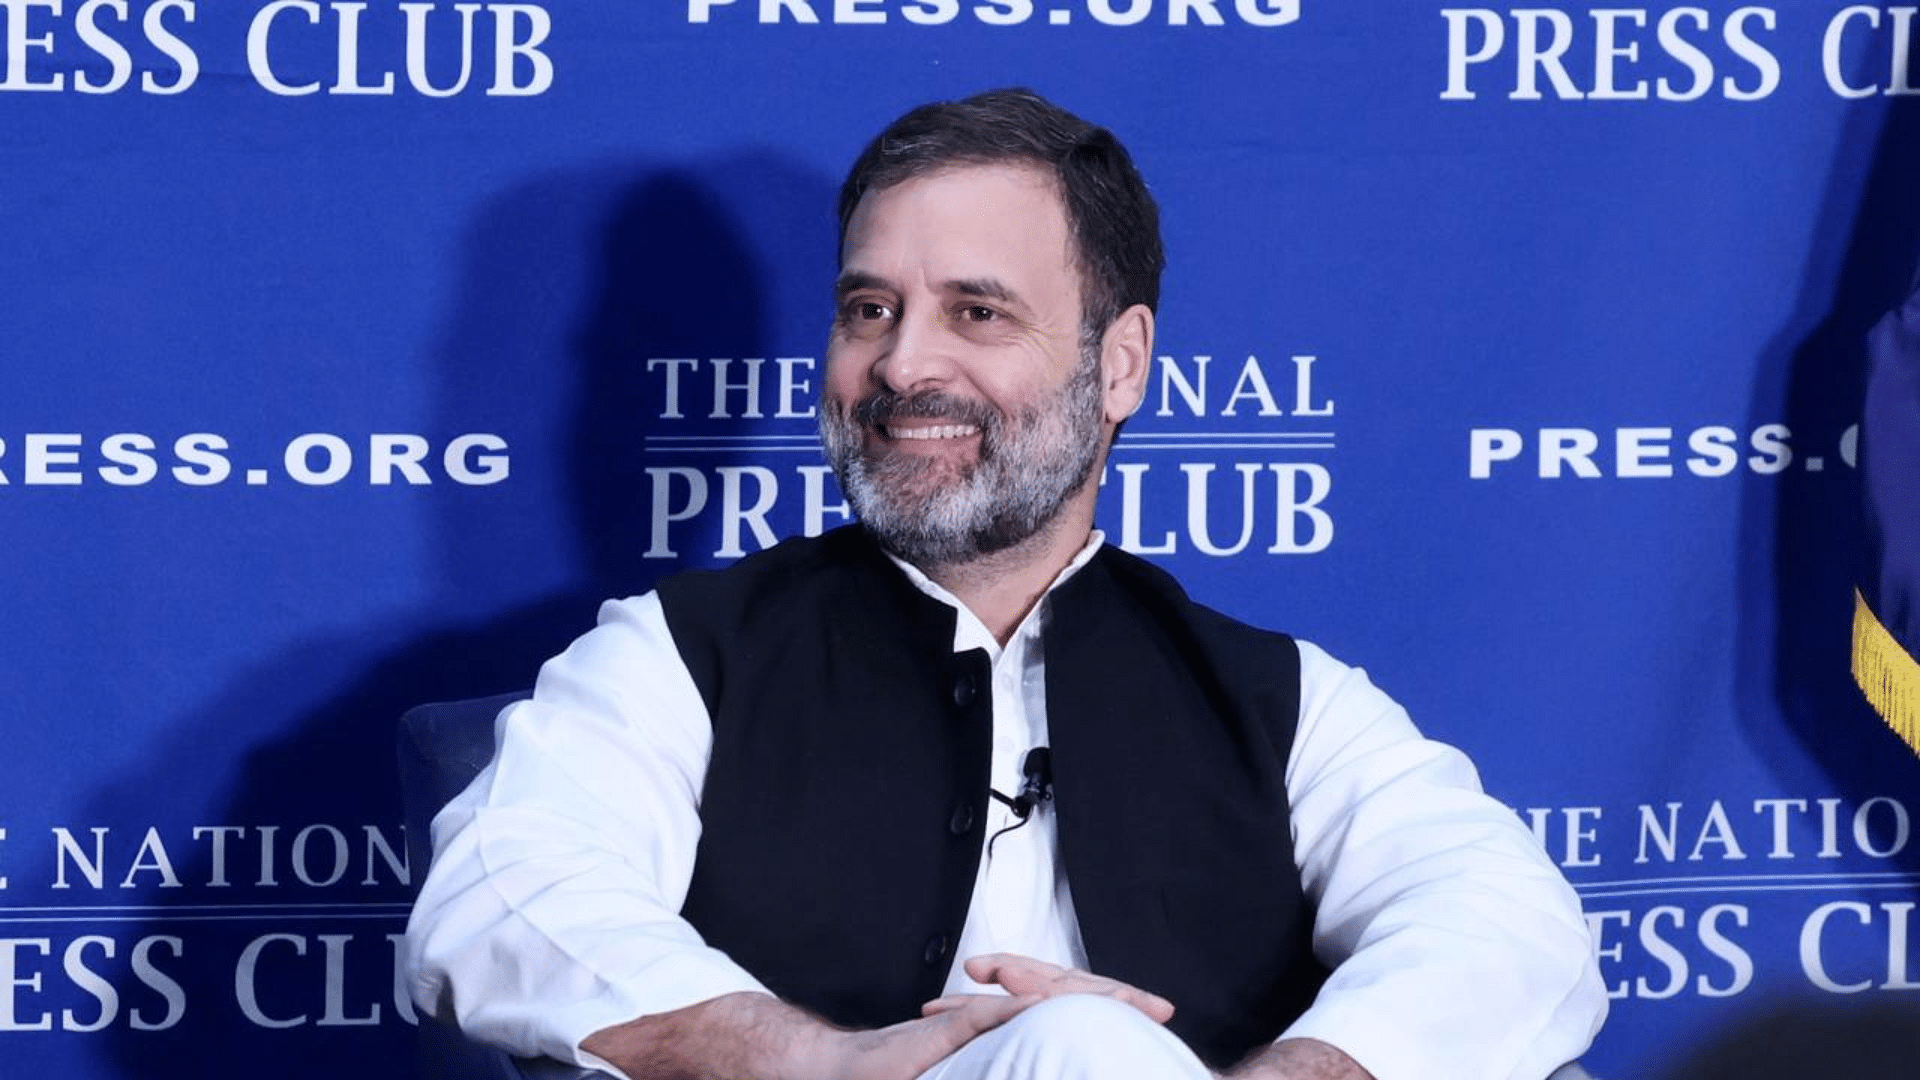 <div class="paragraphs"><p>During an interaction with journalists at the National Press Club in Washington DC, Congress leader Rahul Gandhi voiced his concerns about the state of press freedom in India.</p></div>